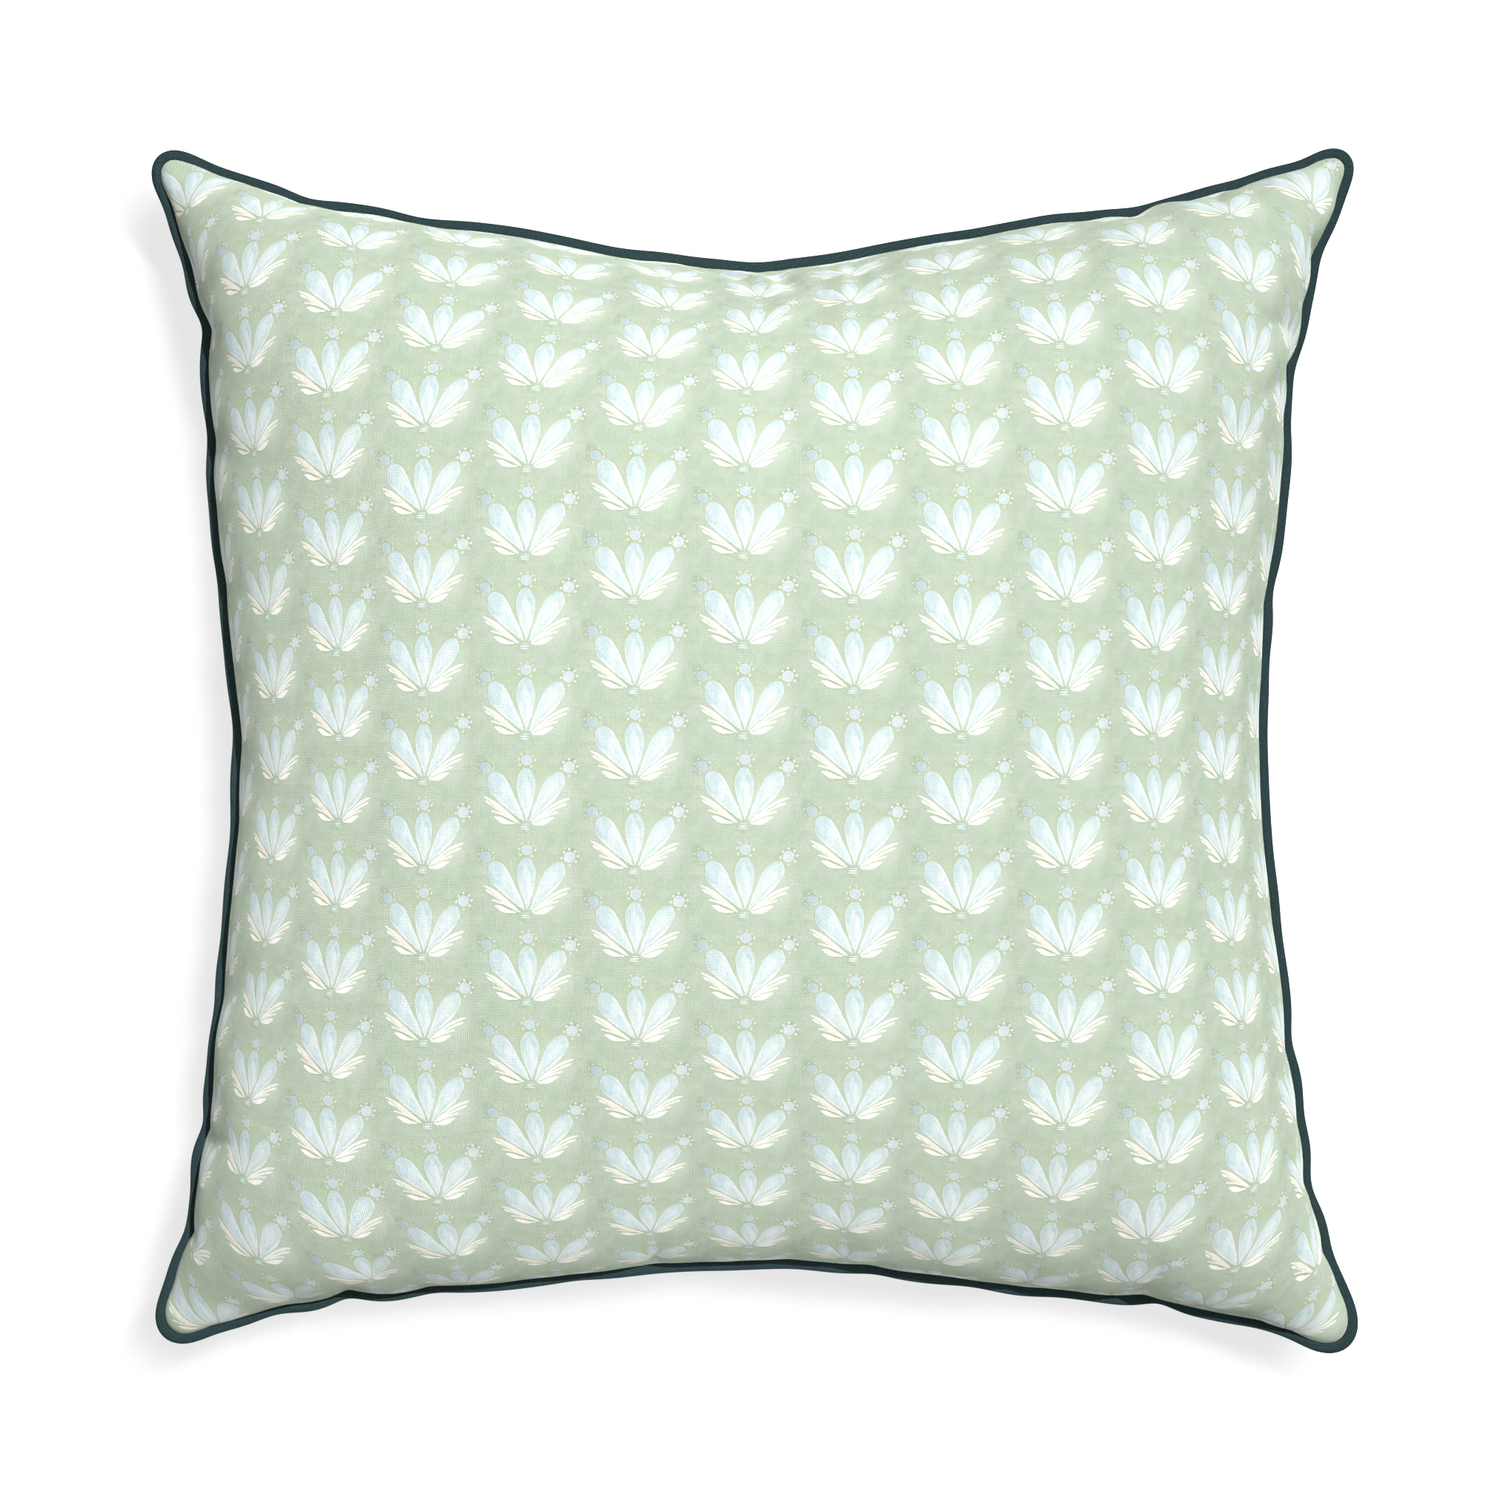 Euro-sham serena sea salt custom blue & green floral drop repeatpillow with p piping on white background